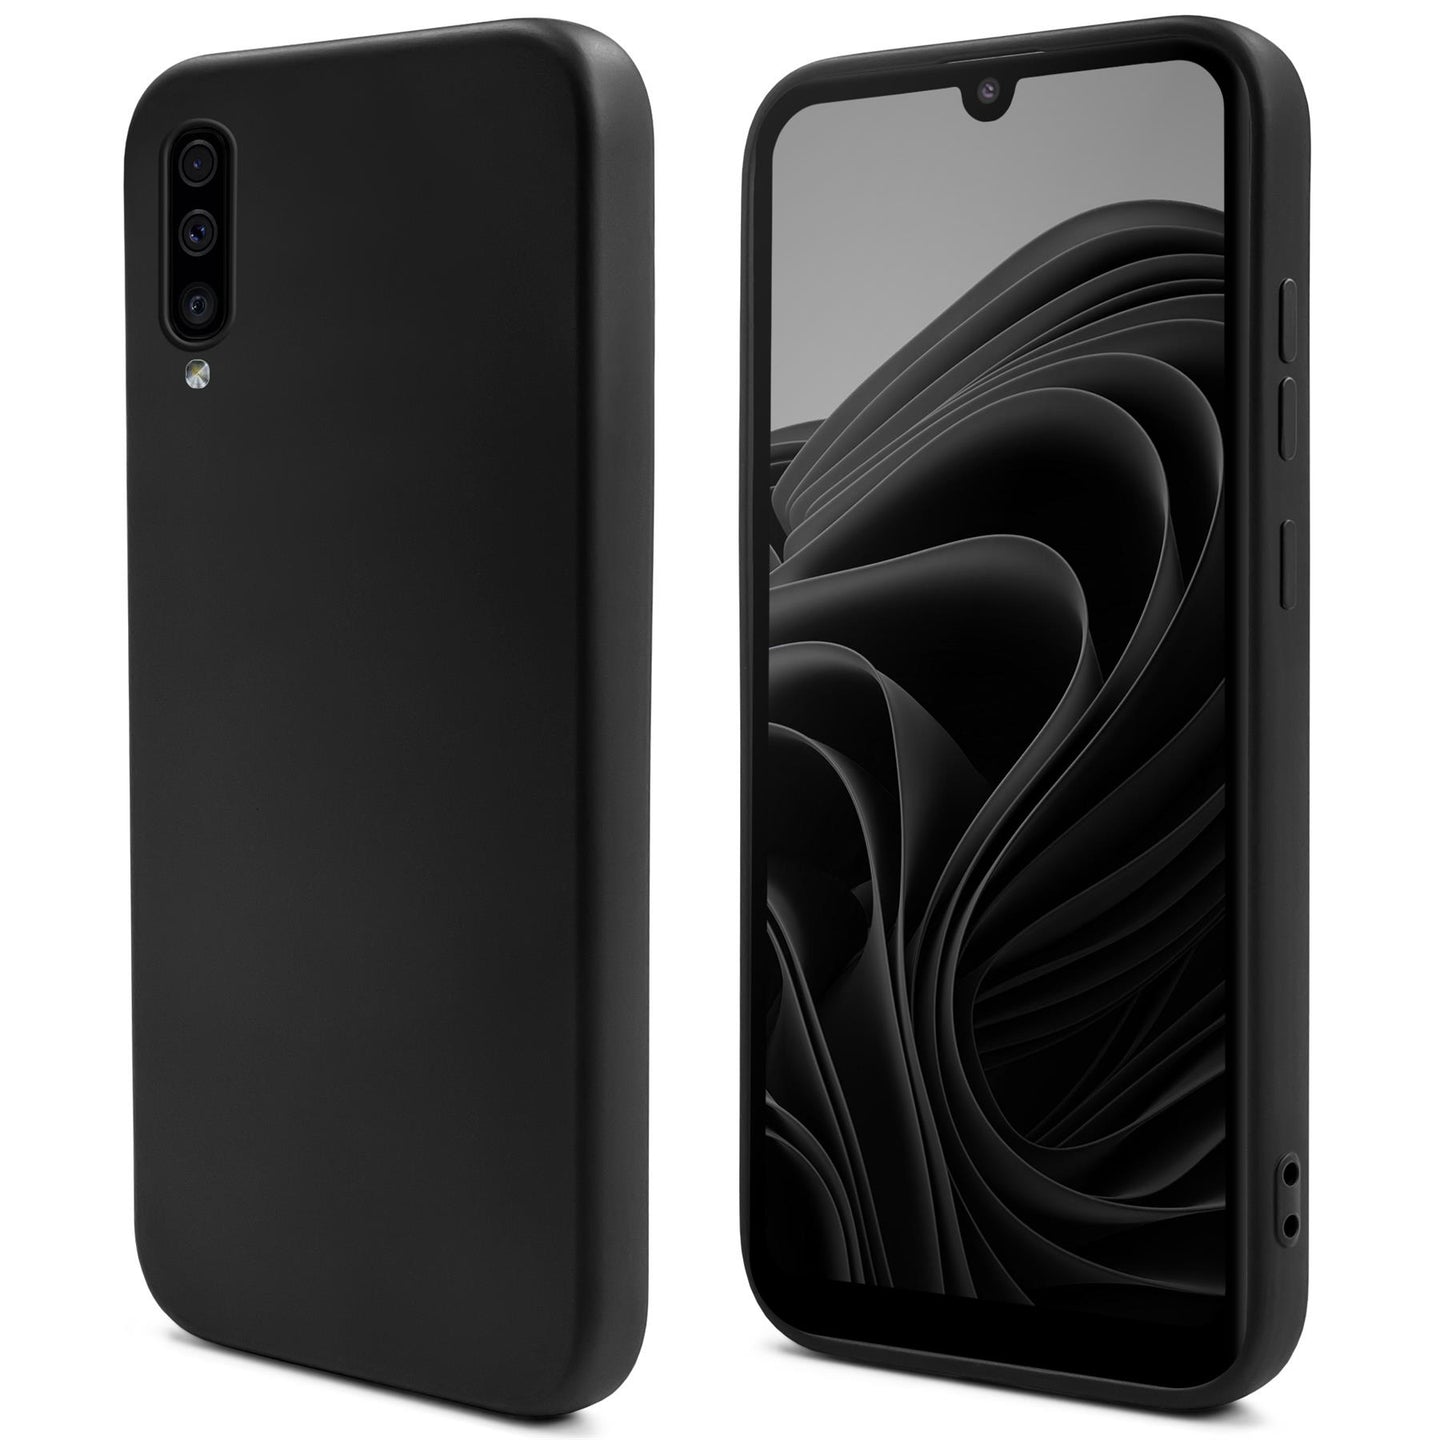 Moozy Lifestyle. Silicone Case for Samsung A50, Black - Liquid Silicone Lightweight Cover with Matte Finish and Soft Microfiber Lining, Premium Silicone Case